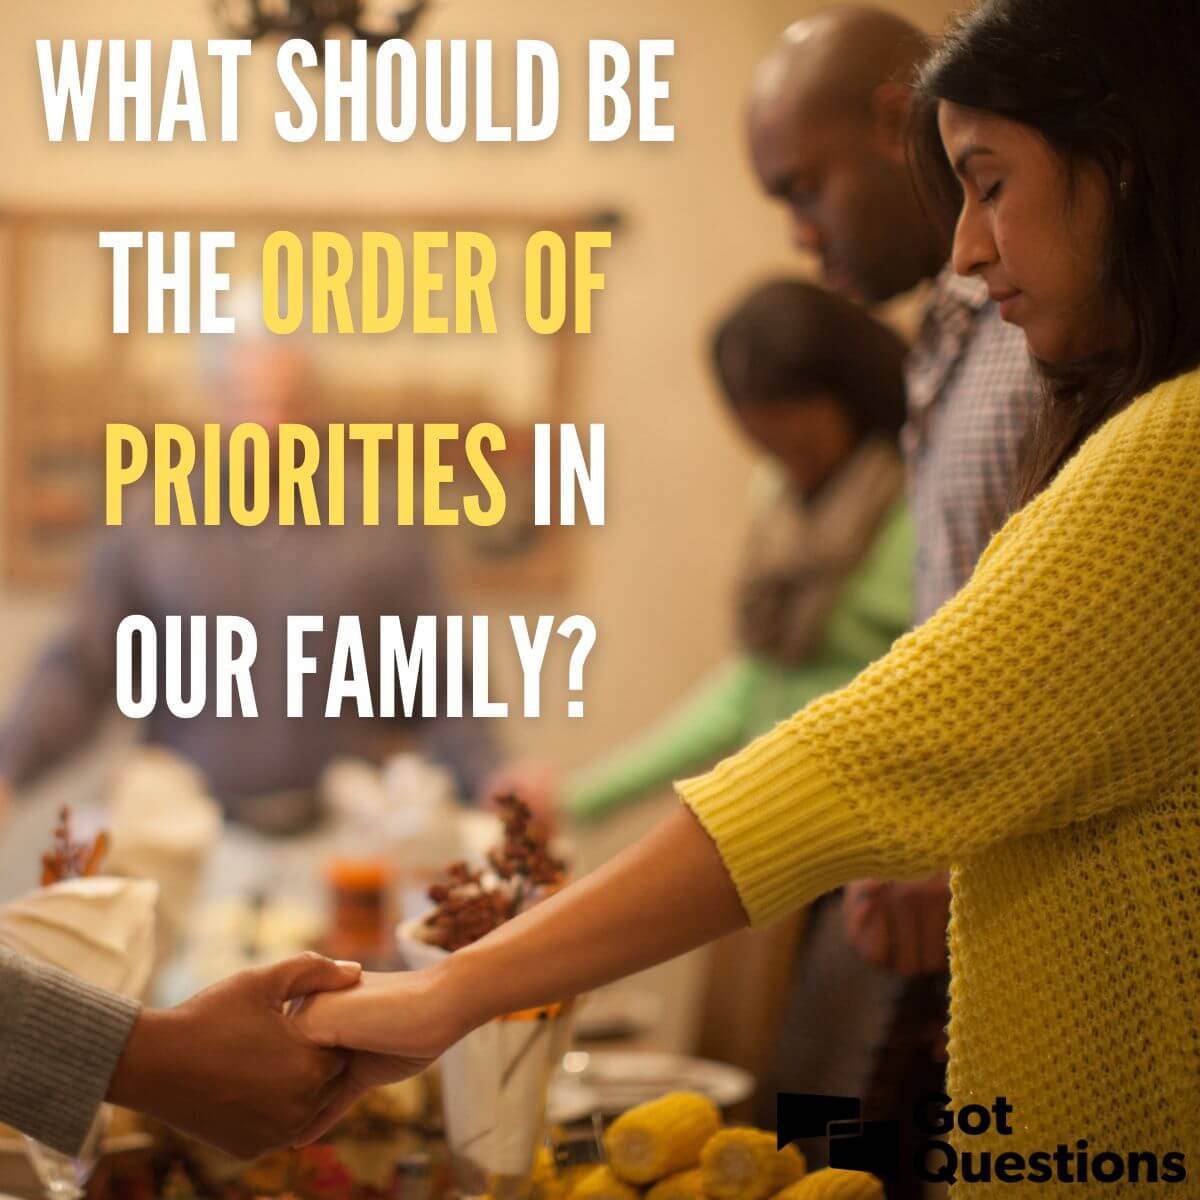 What should be the order of priorities in our family